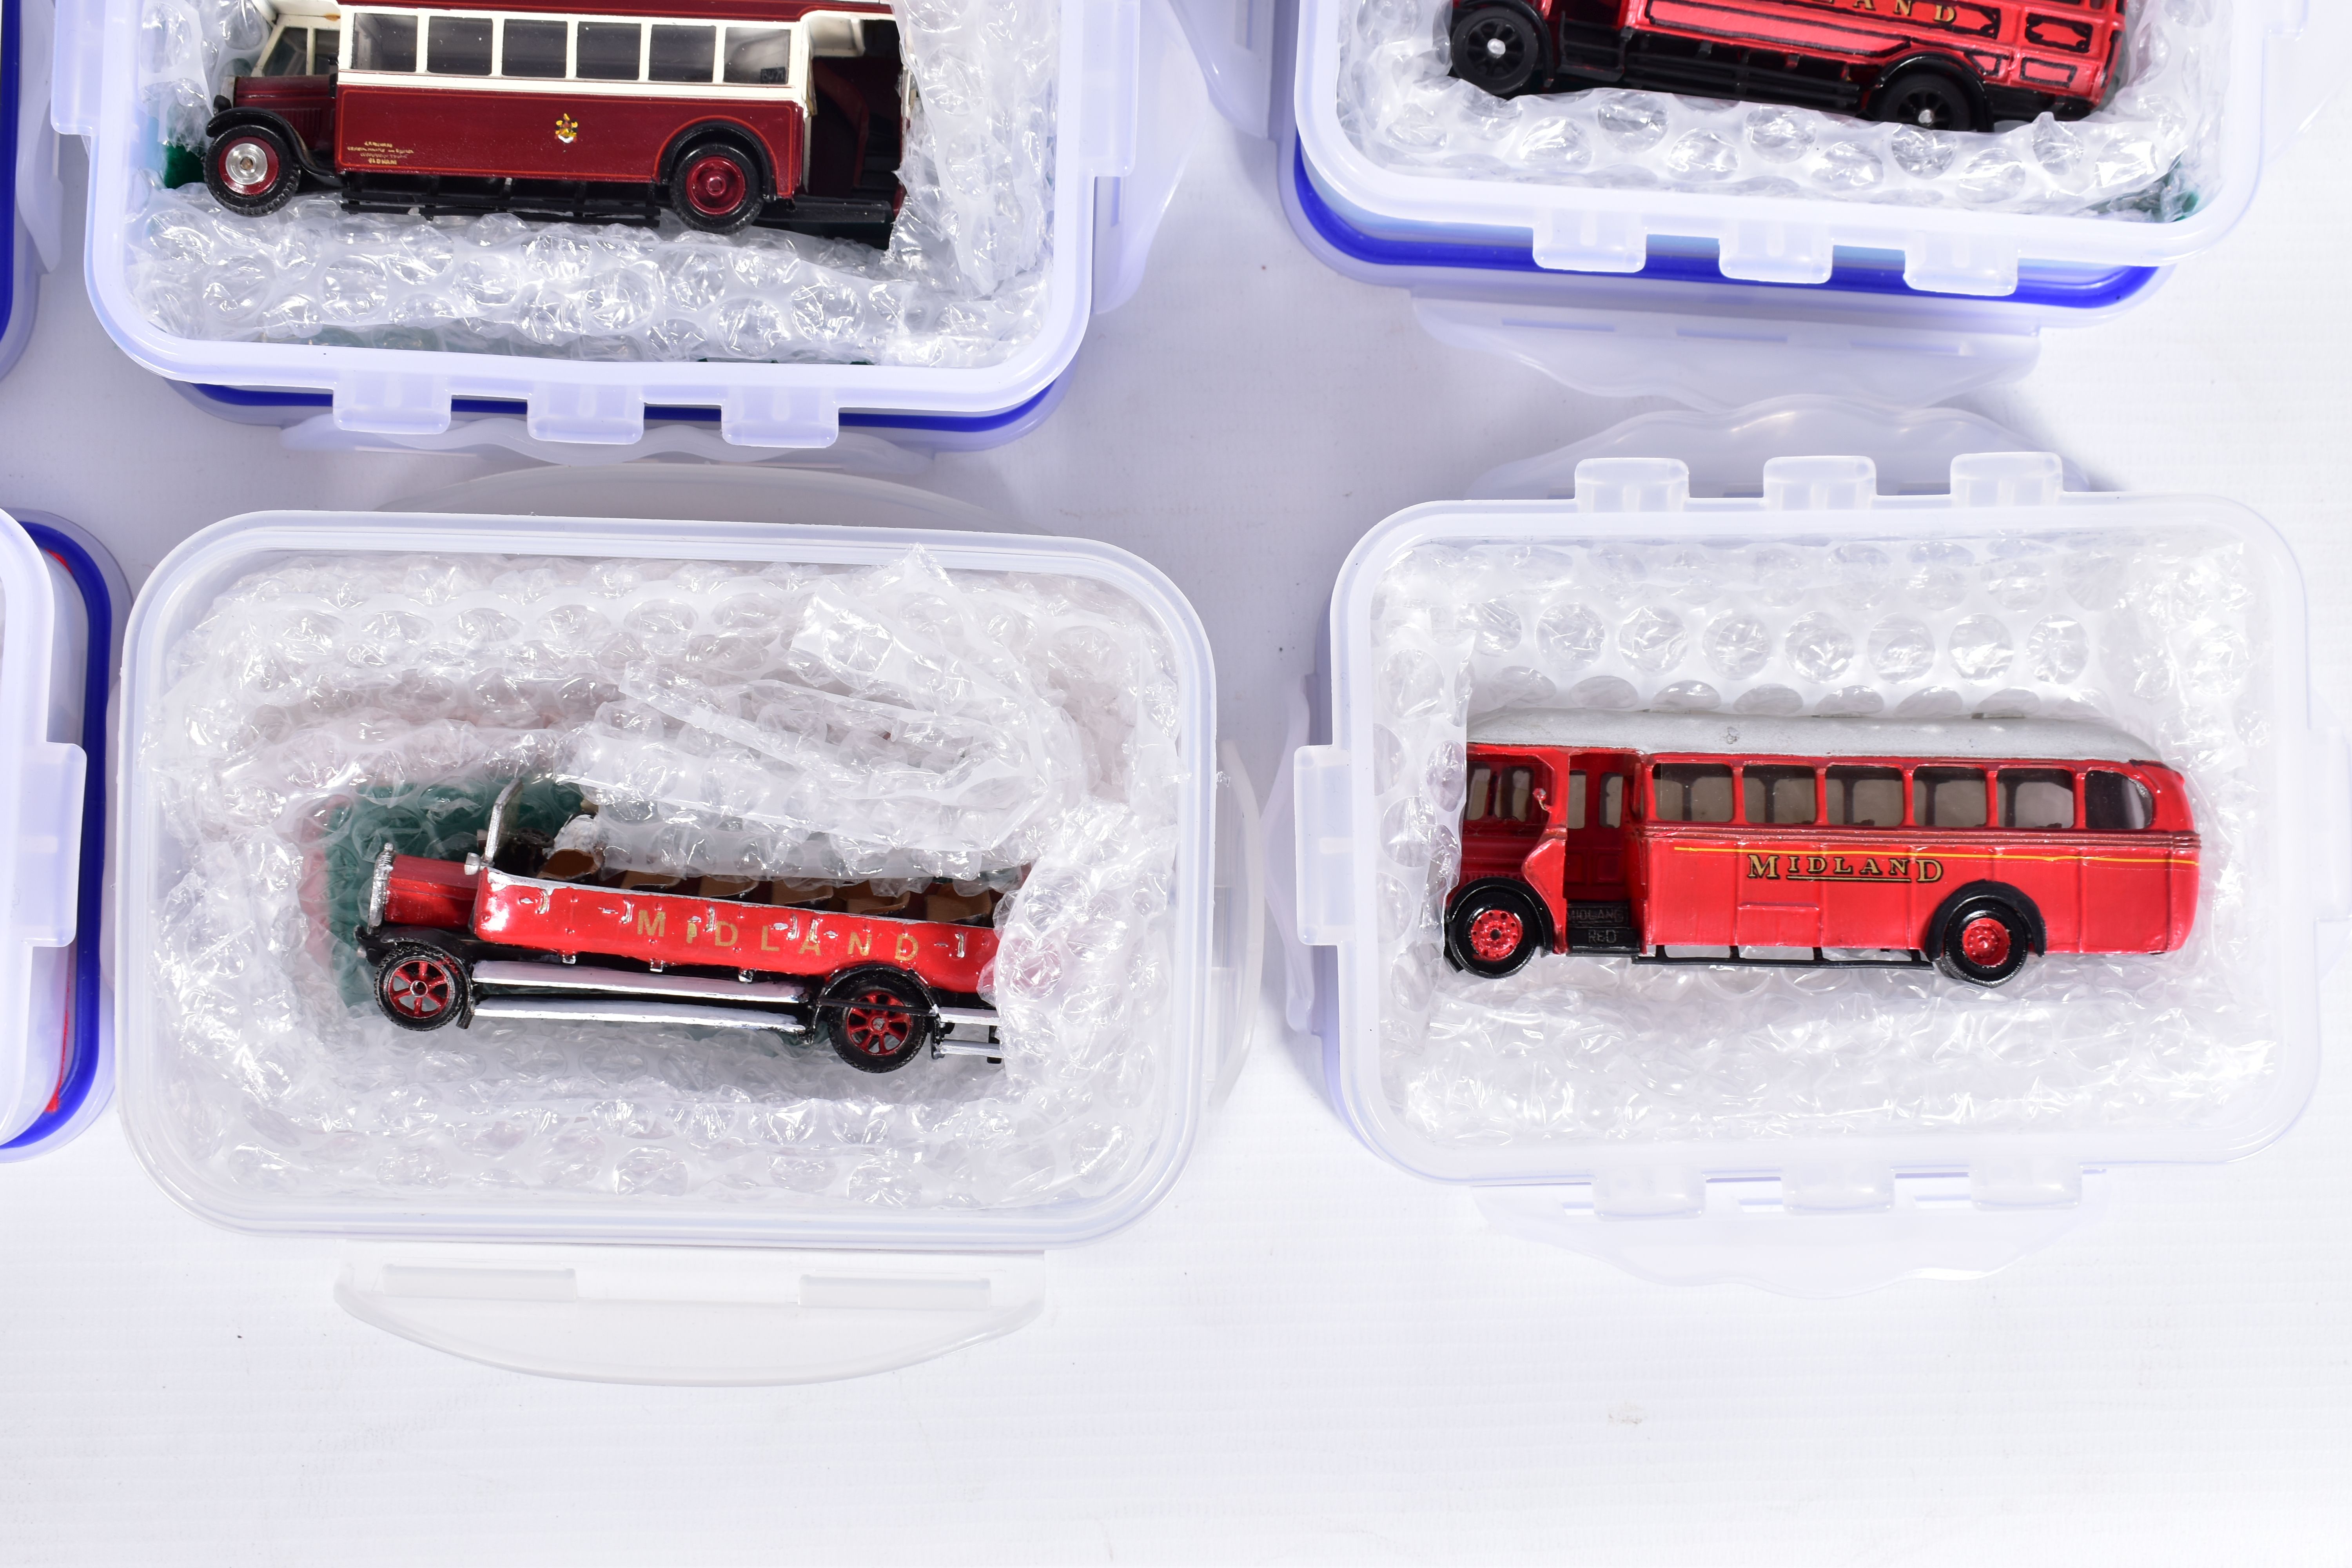 A COLLECTION OF CONSTRUCTED WHITEMETAL KIT MIDLAND RED BUS MODELS, all are 1/76 scale kit models and - Image 2 of 11